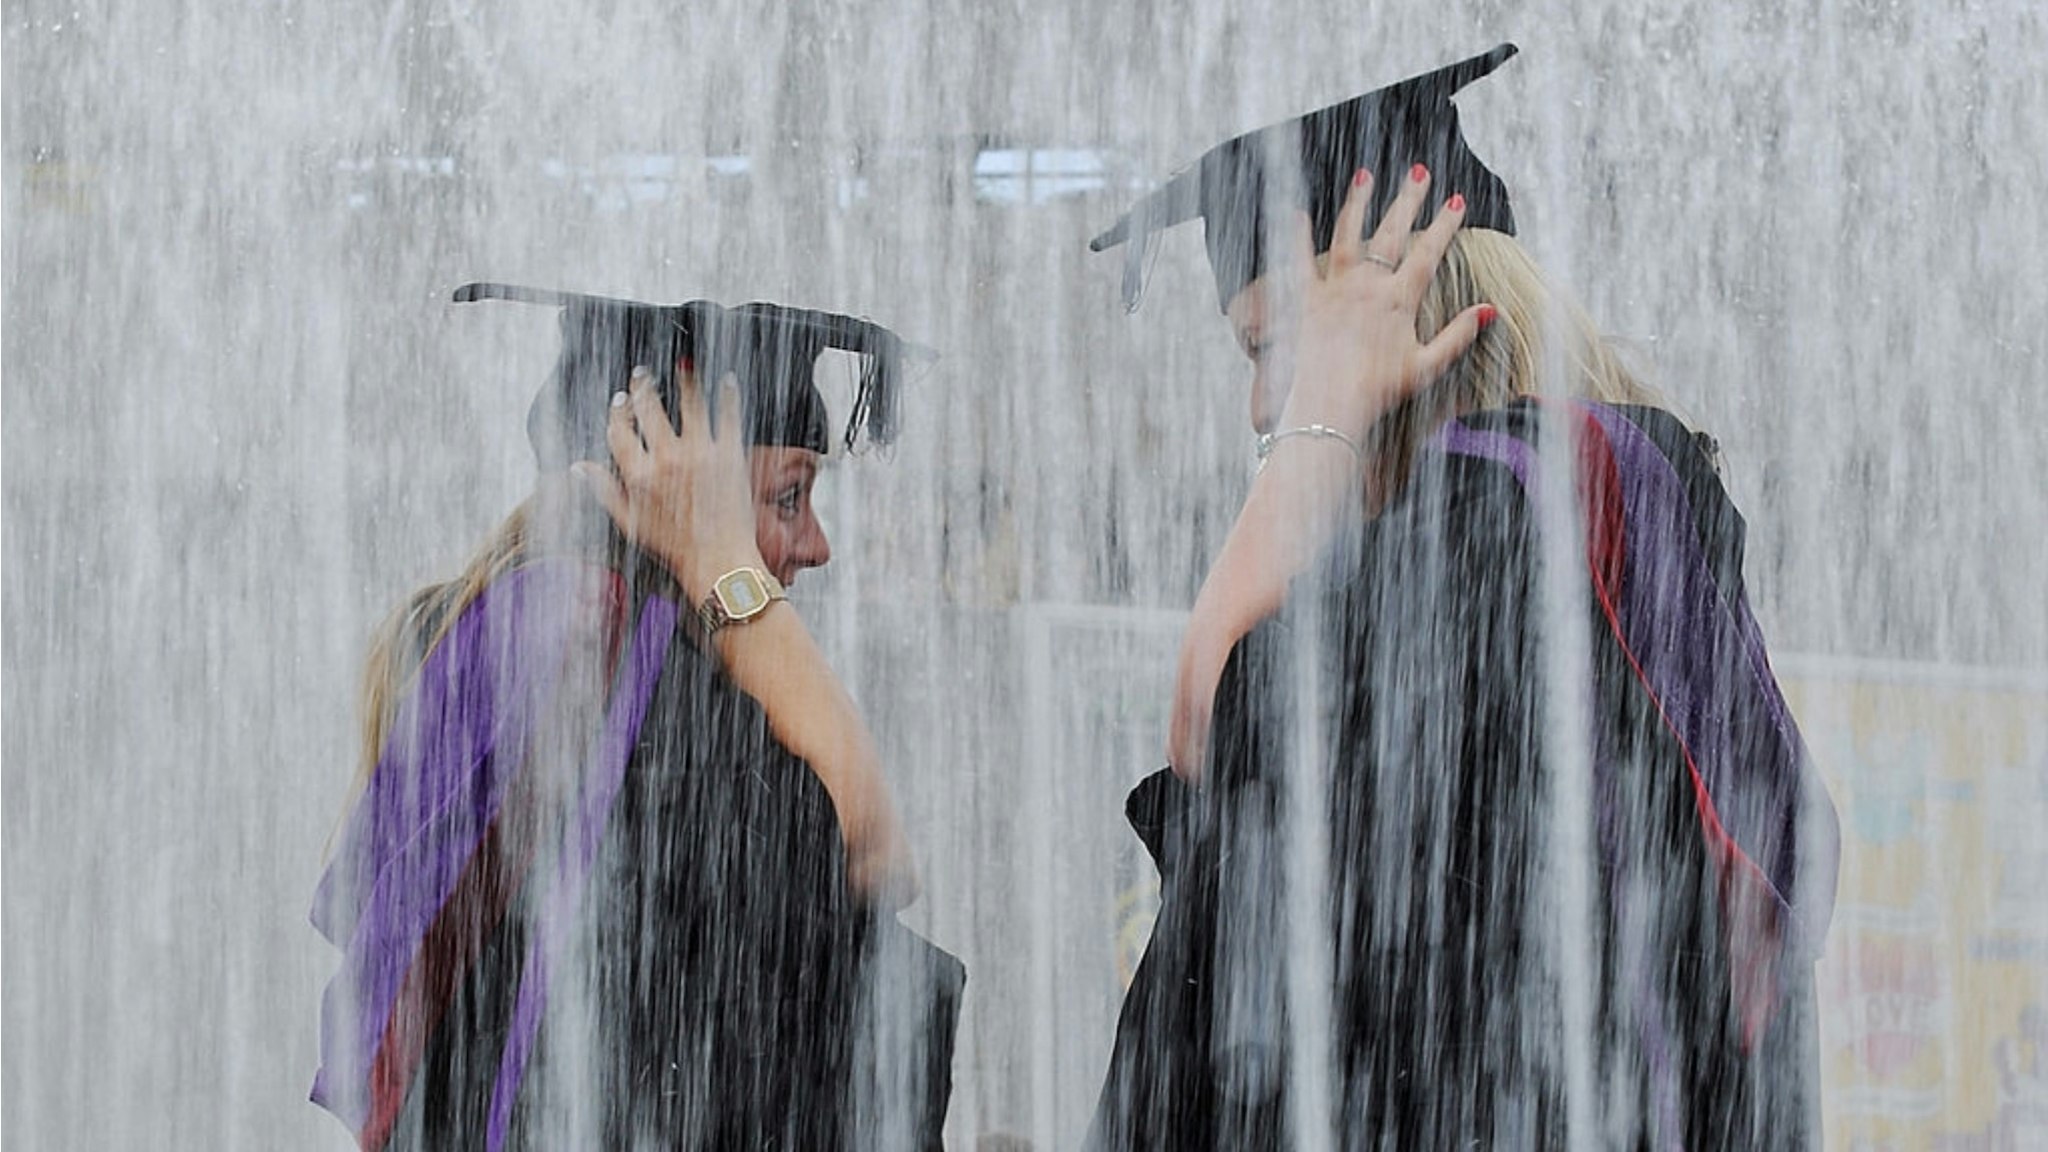 Students stand in a fountain ahead of their graduation ceremony at the Royal Festival Hall on July 15, 2014 in London, England.